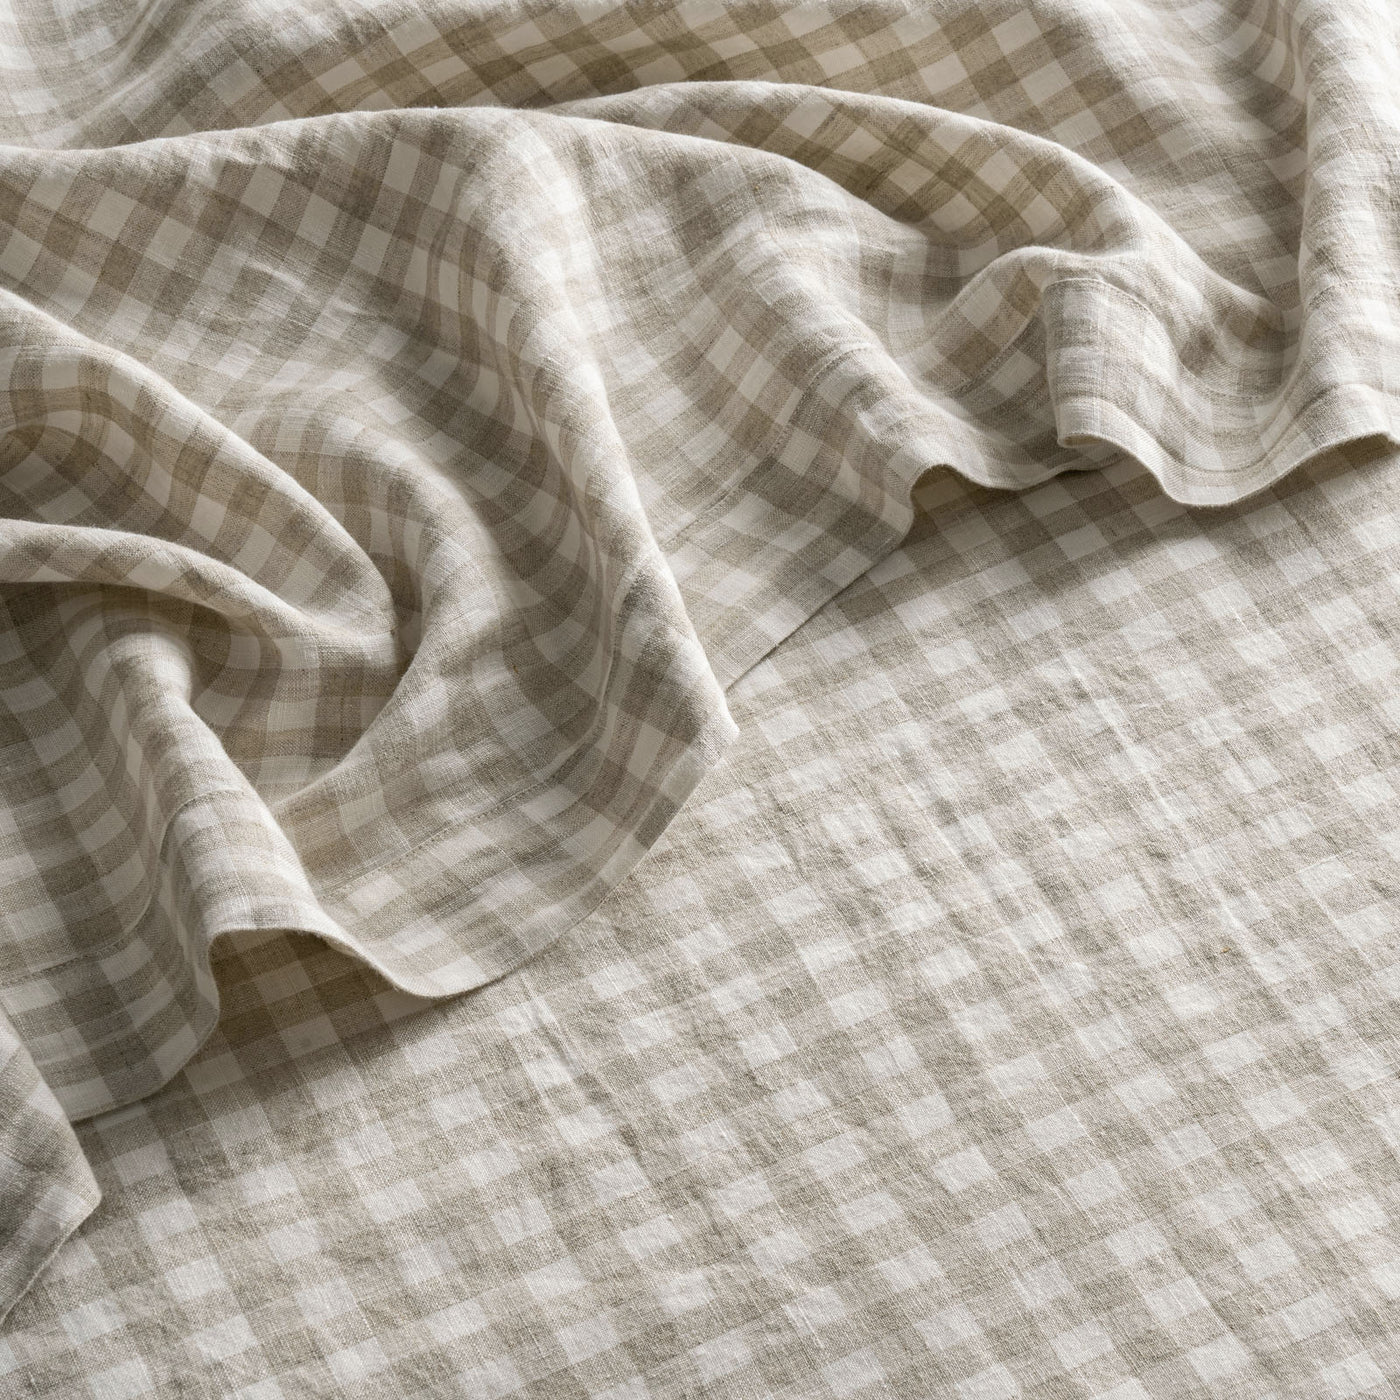 French Flax Linen Flat Sheet in Beige Gingham